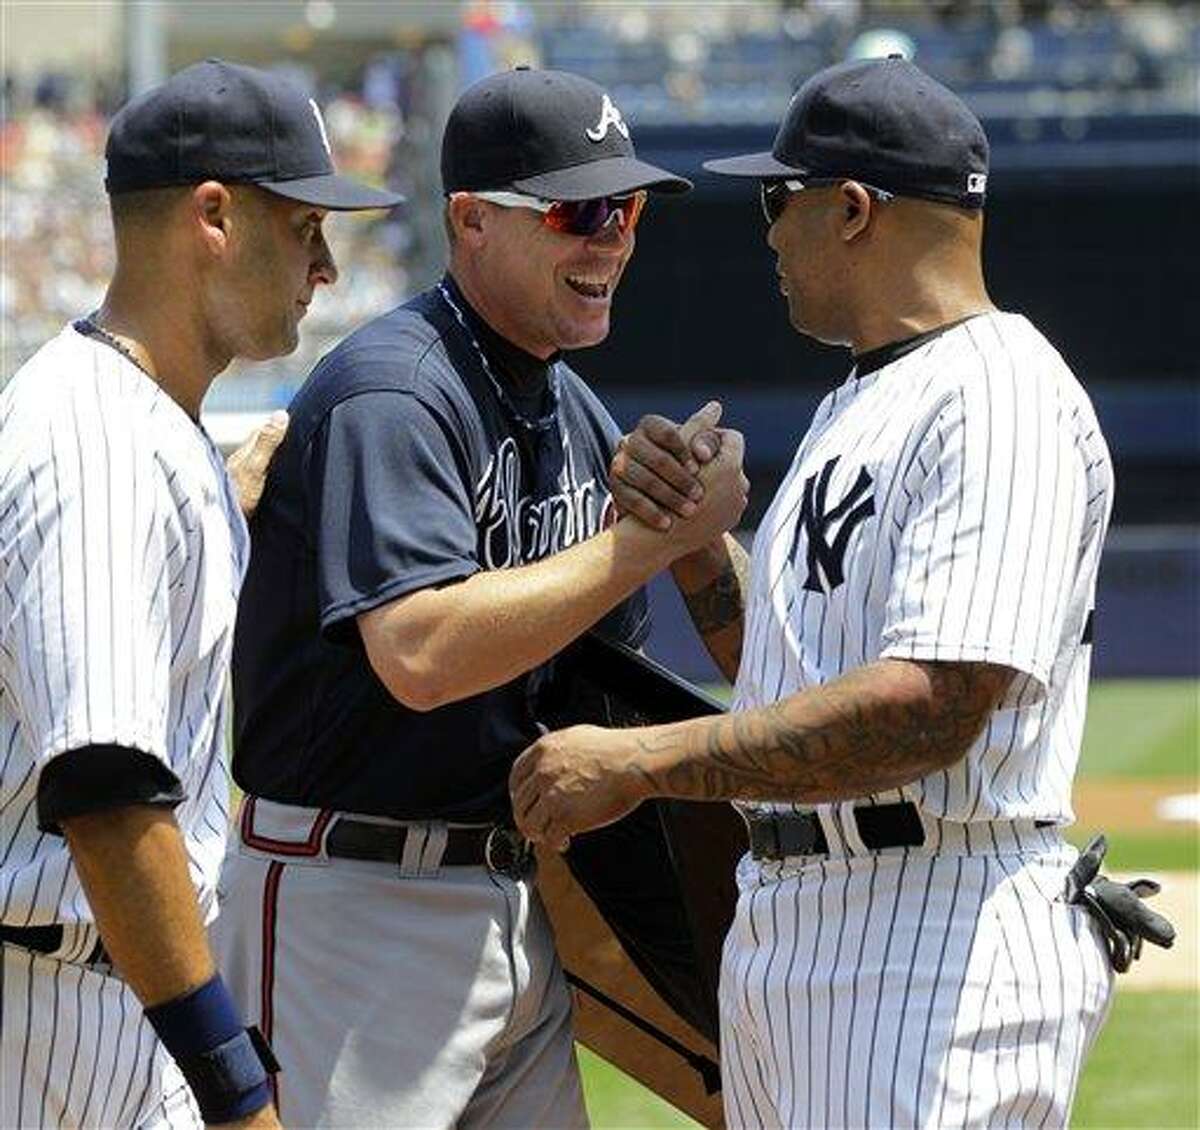 Atlanta Braves - As we look forward to the retirement of Andruw